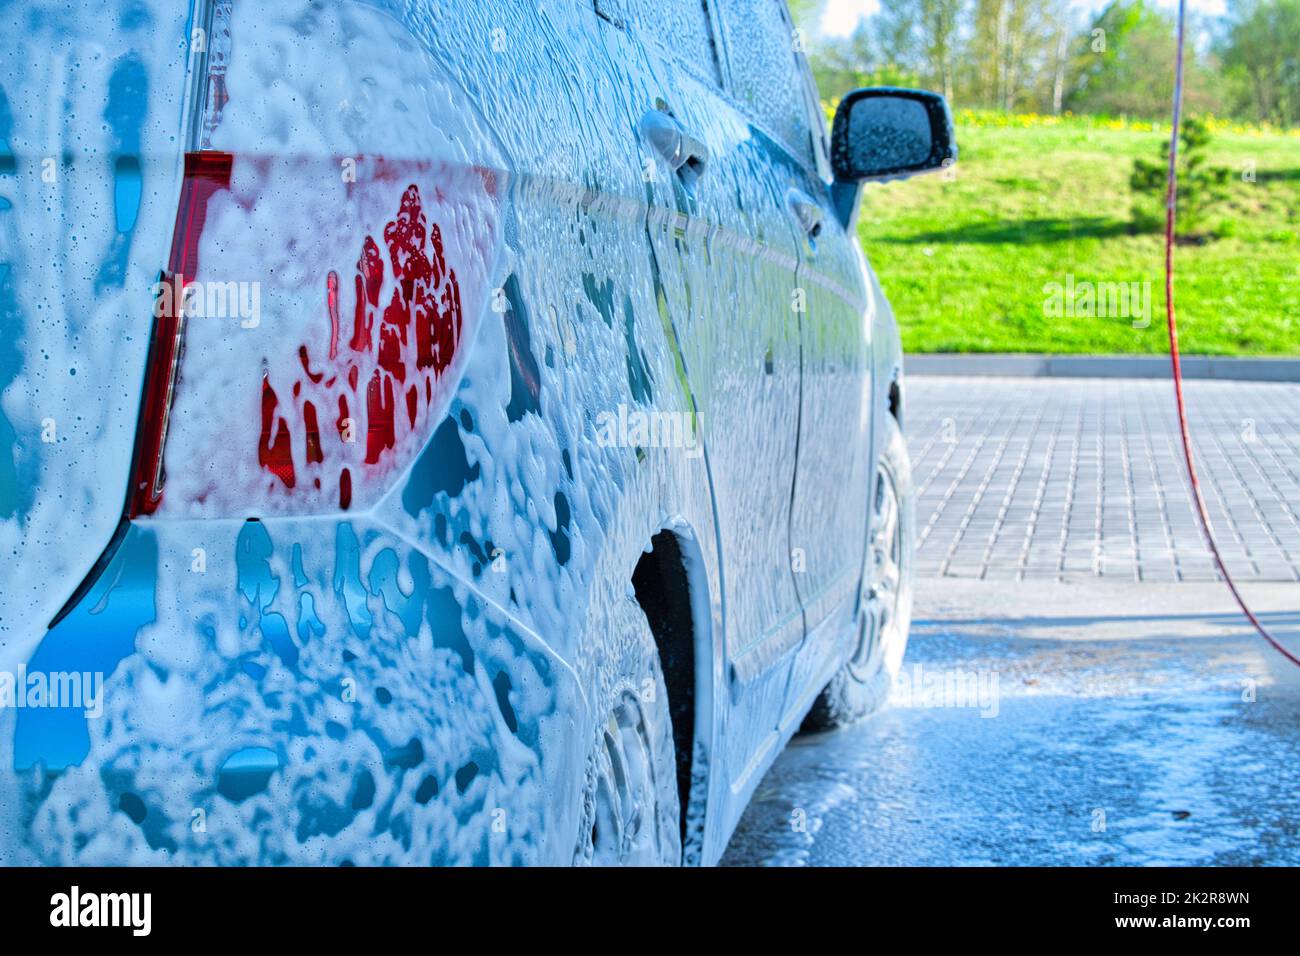 Red compact SUV car with sport and modern design washing with soap. Car  covered with white foam. Car care service business concept. Car wash with  foam Stock Photo - Alamy